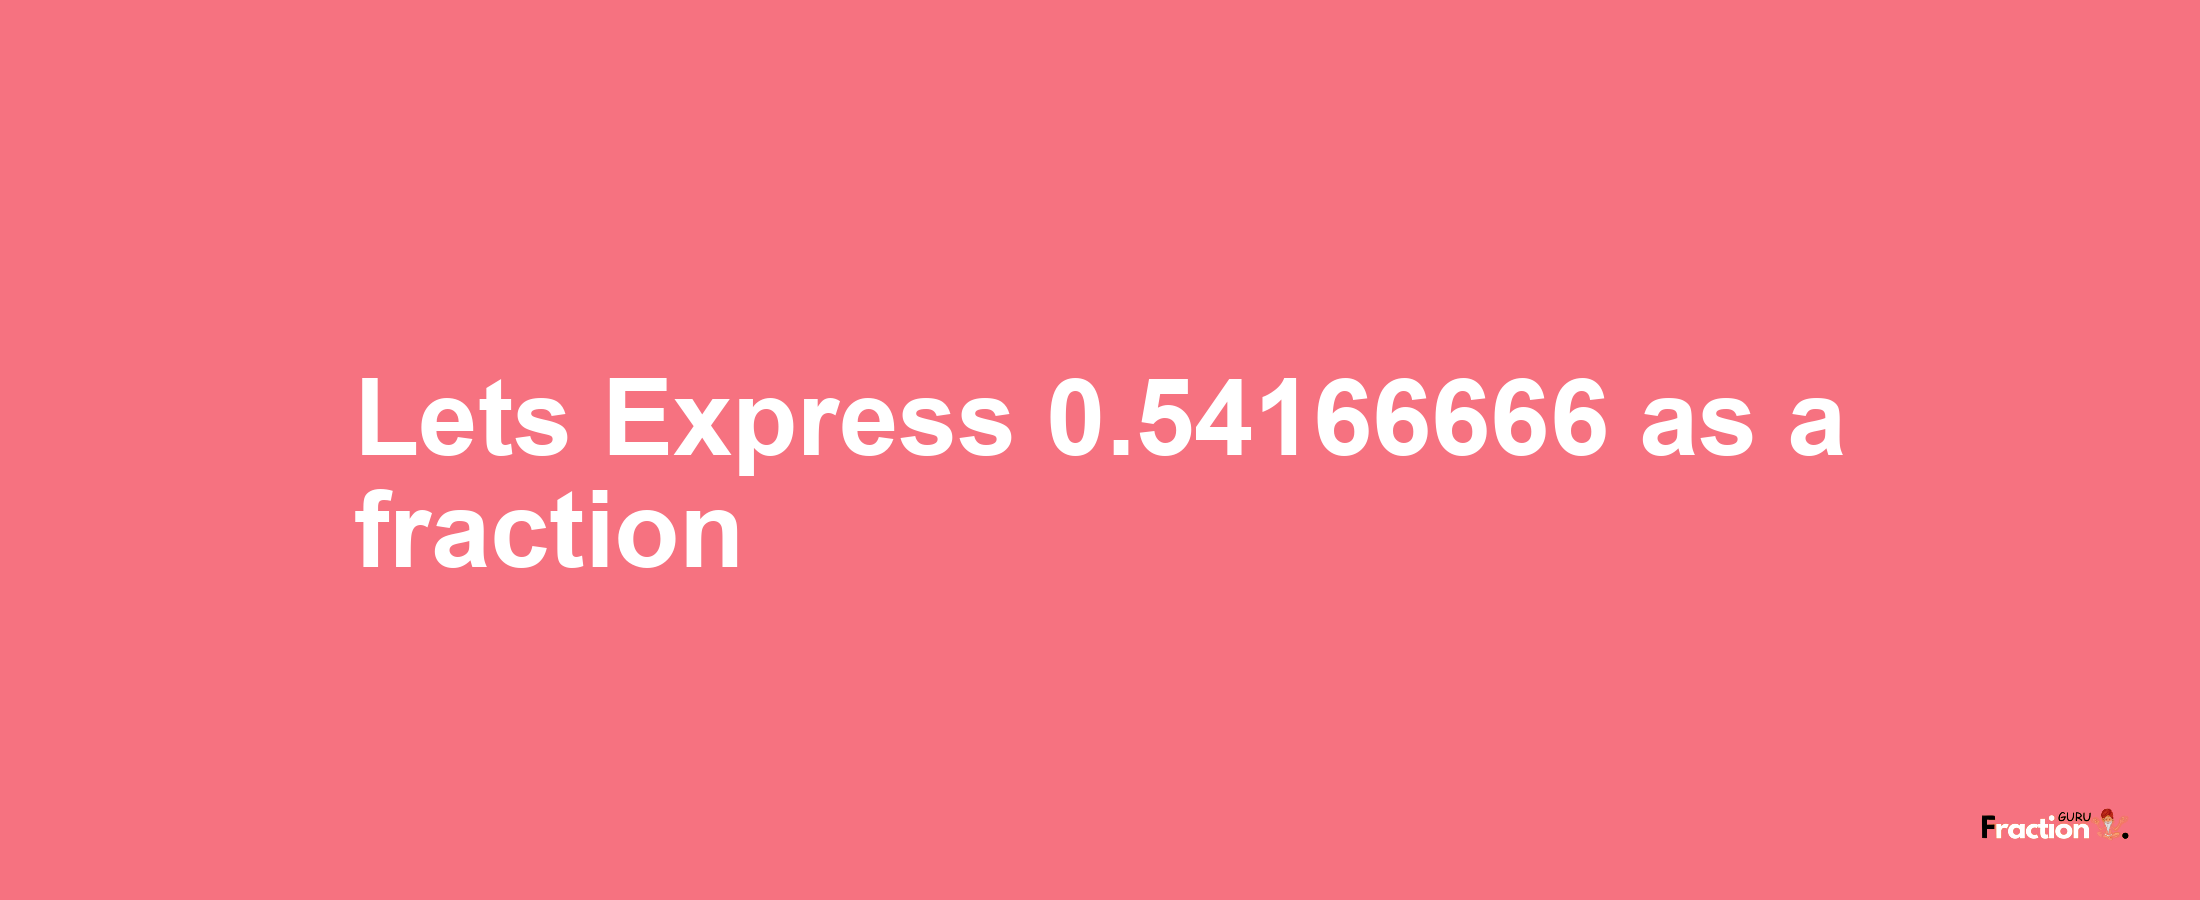 Lets Express 0.54166666 as afraction